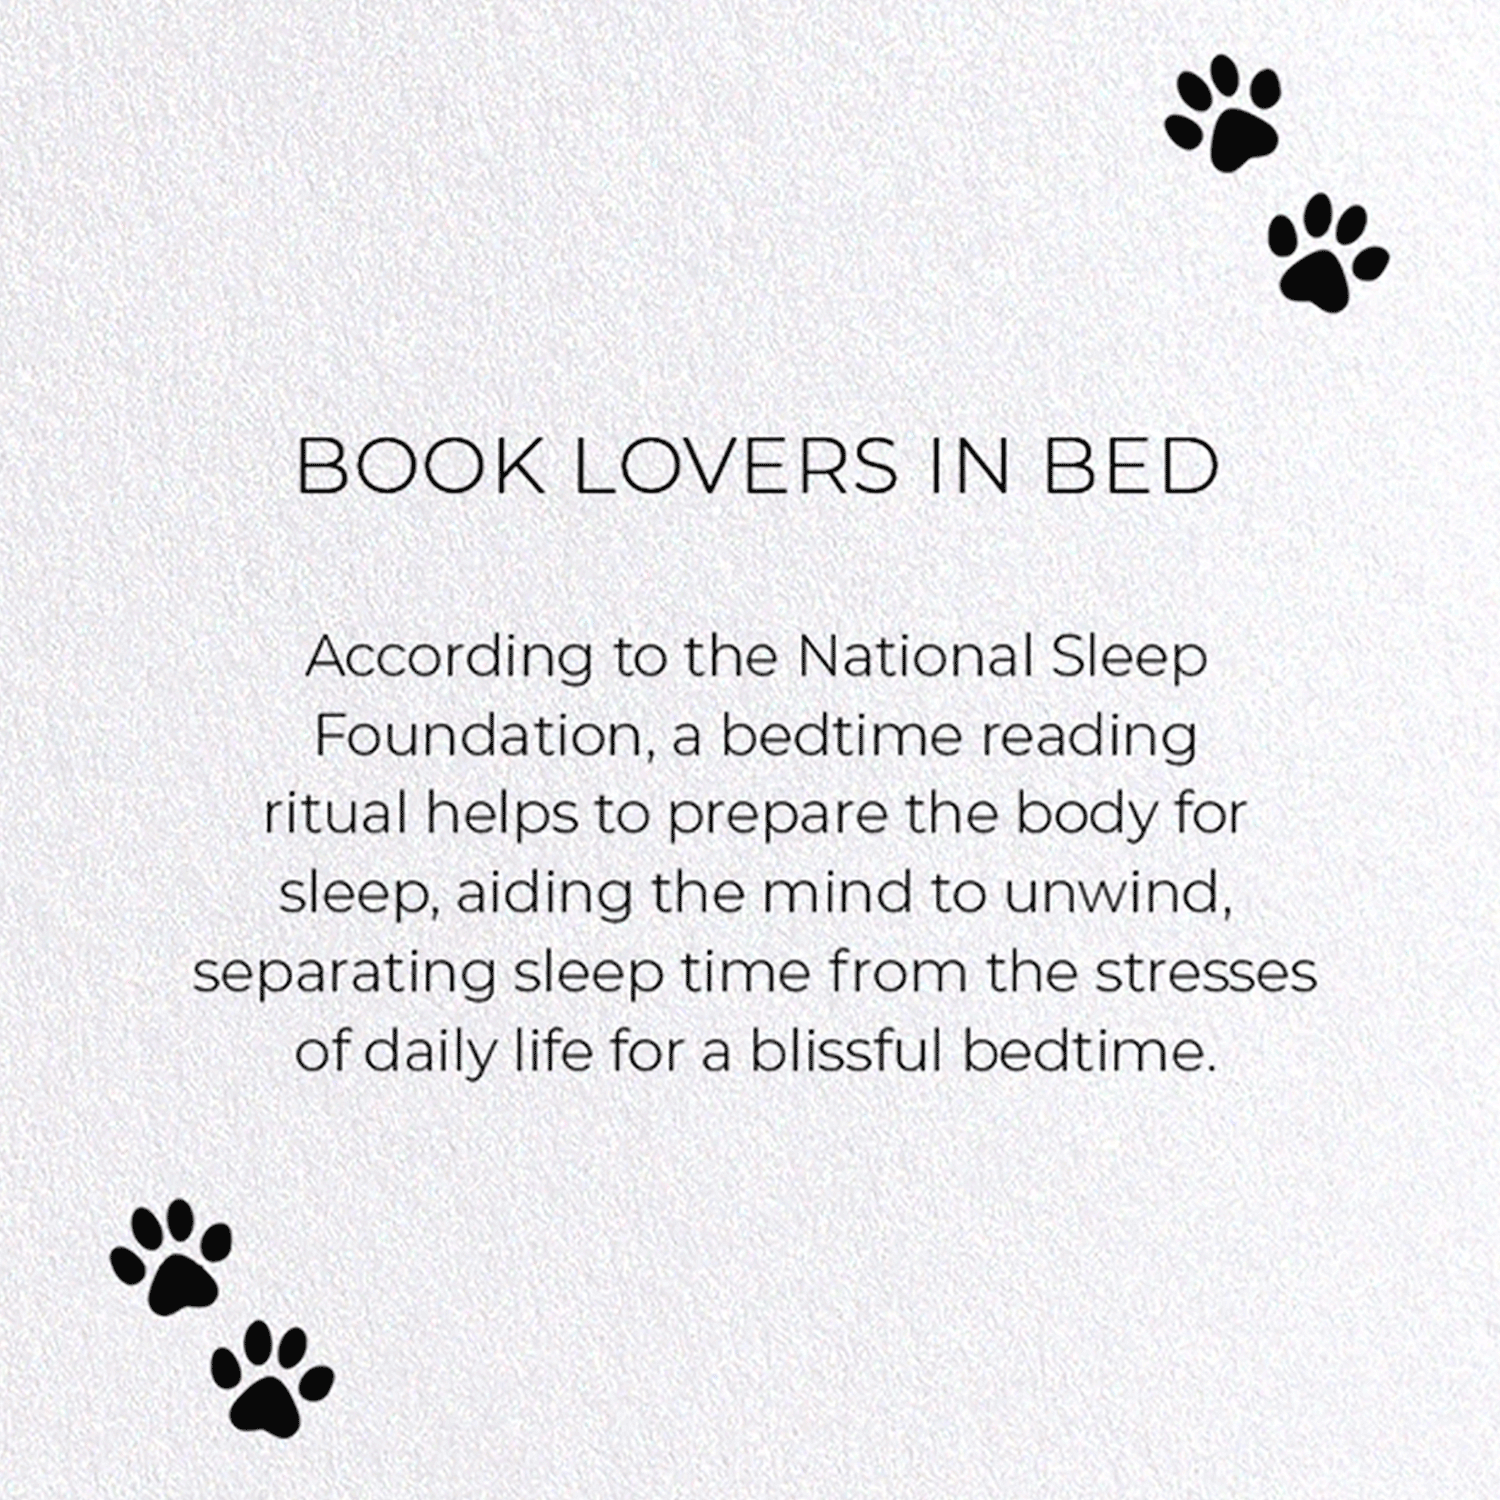 BOOK LOVERS IN BED: Funny Animal Greeting Card